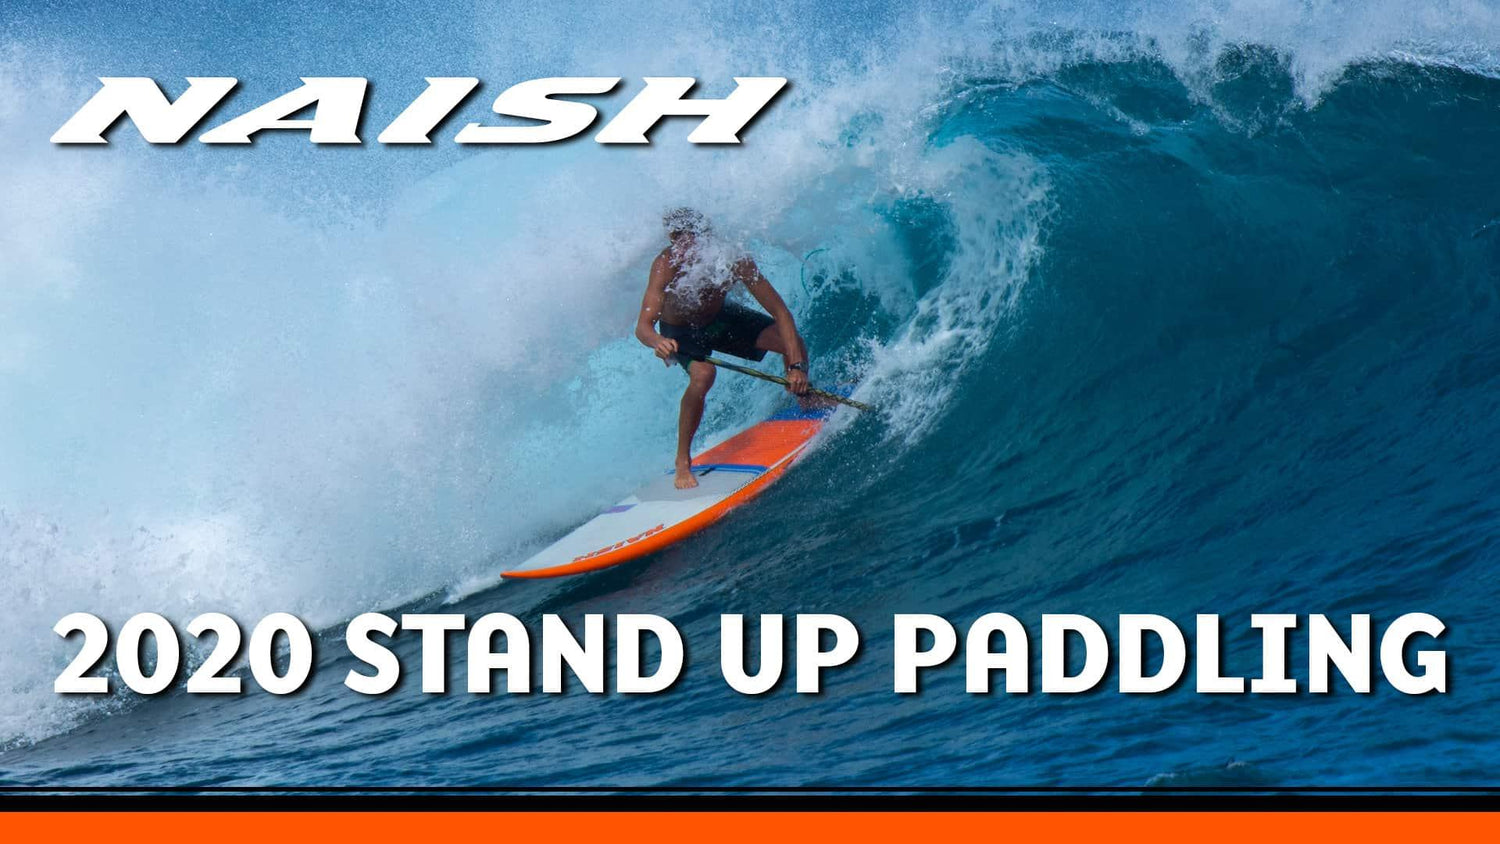 Naish Stand Up Paddling 2020 | Welcome to Our World - Naish.com